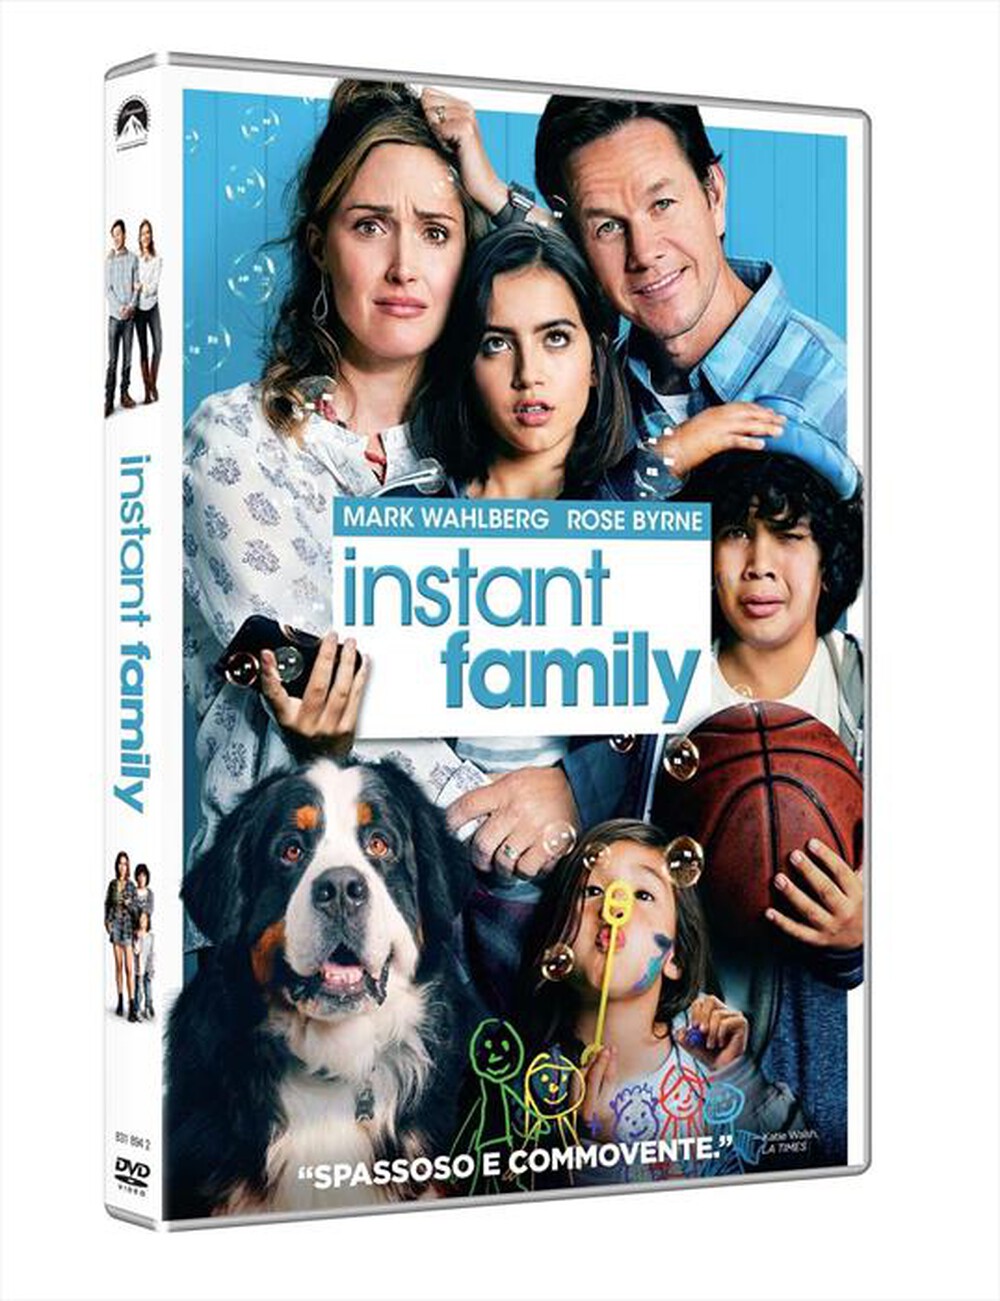 "UNIVERSAL PICTURES - Instant Family - "